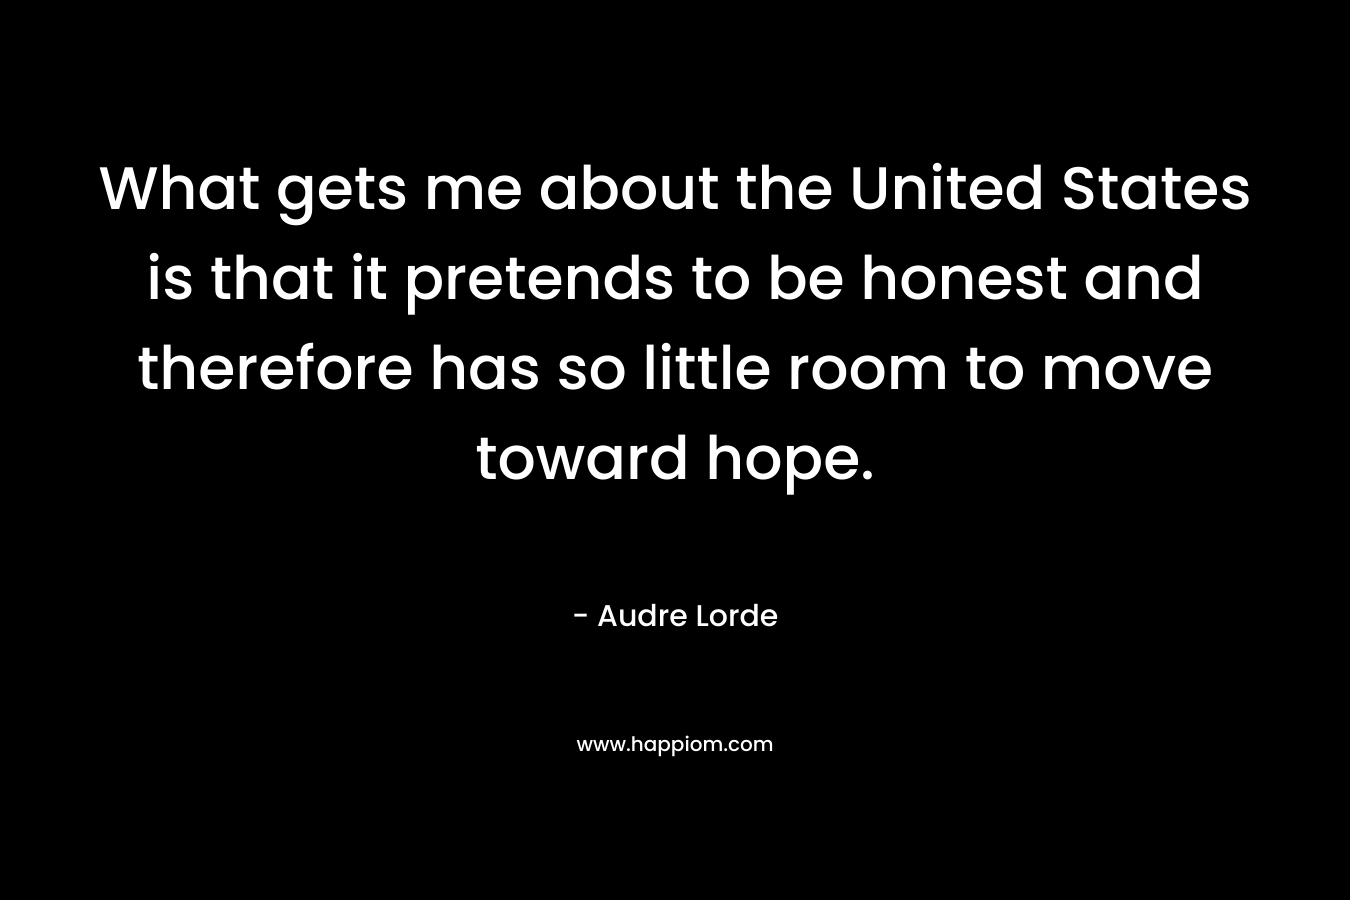 What gets me about the United States is that it pretends to be honest and therefore has so little room to move toward hope.